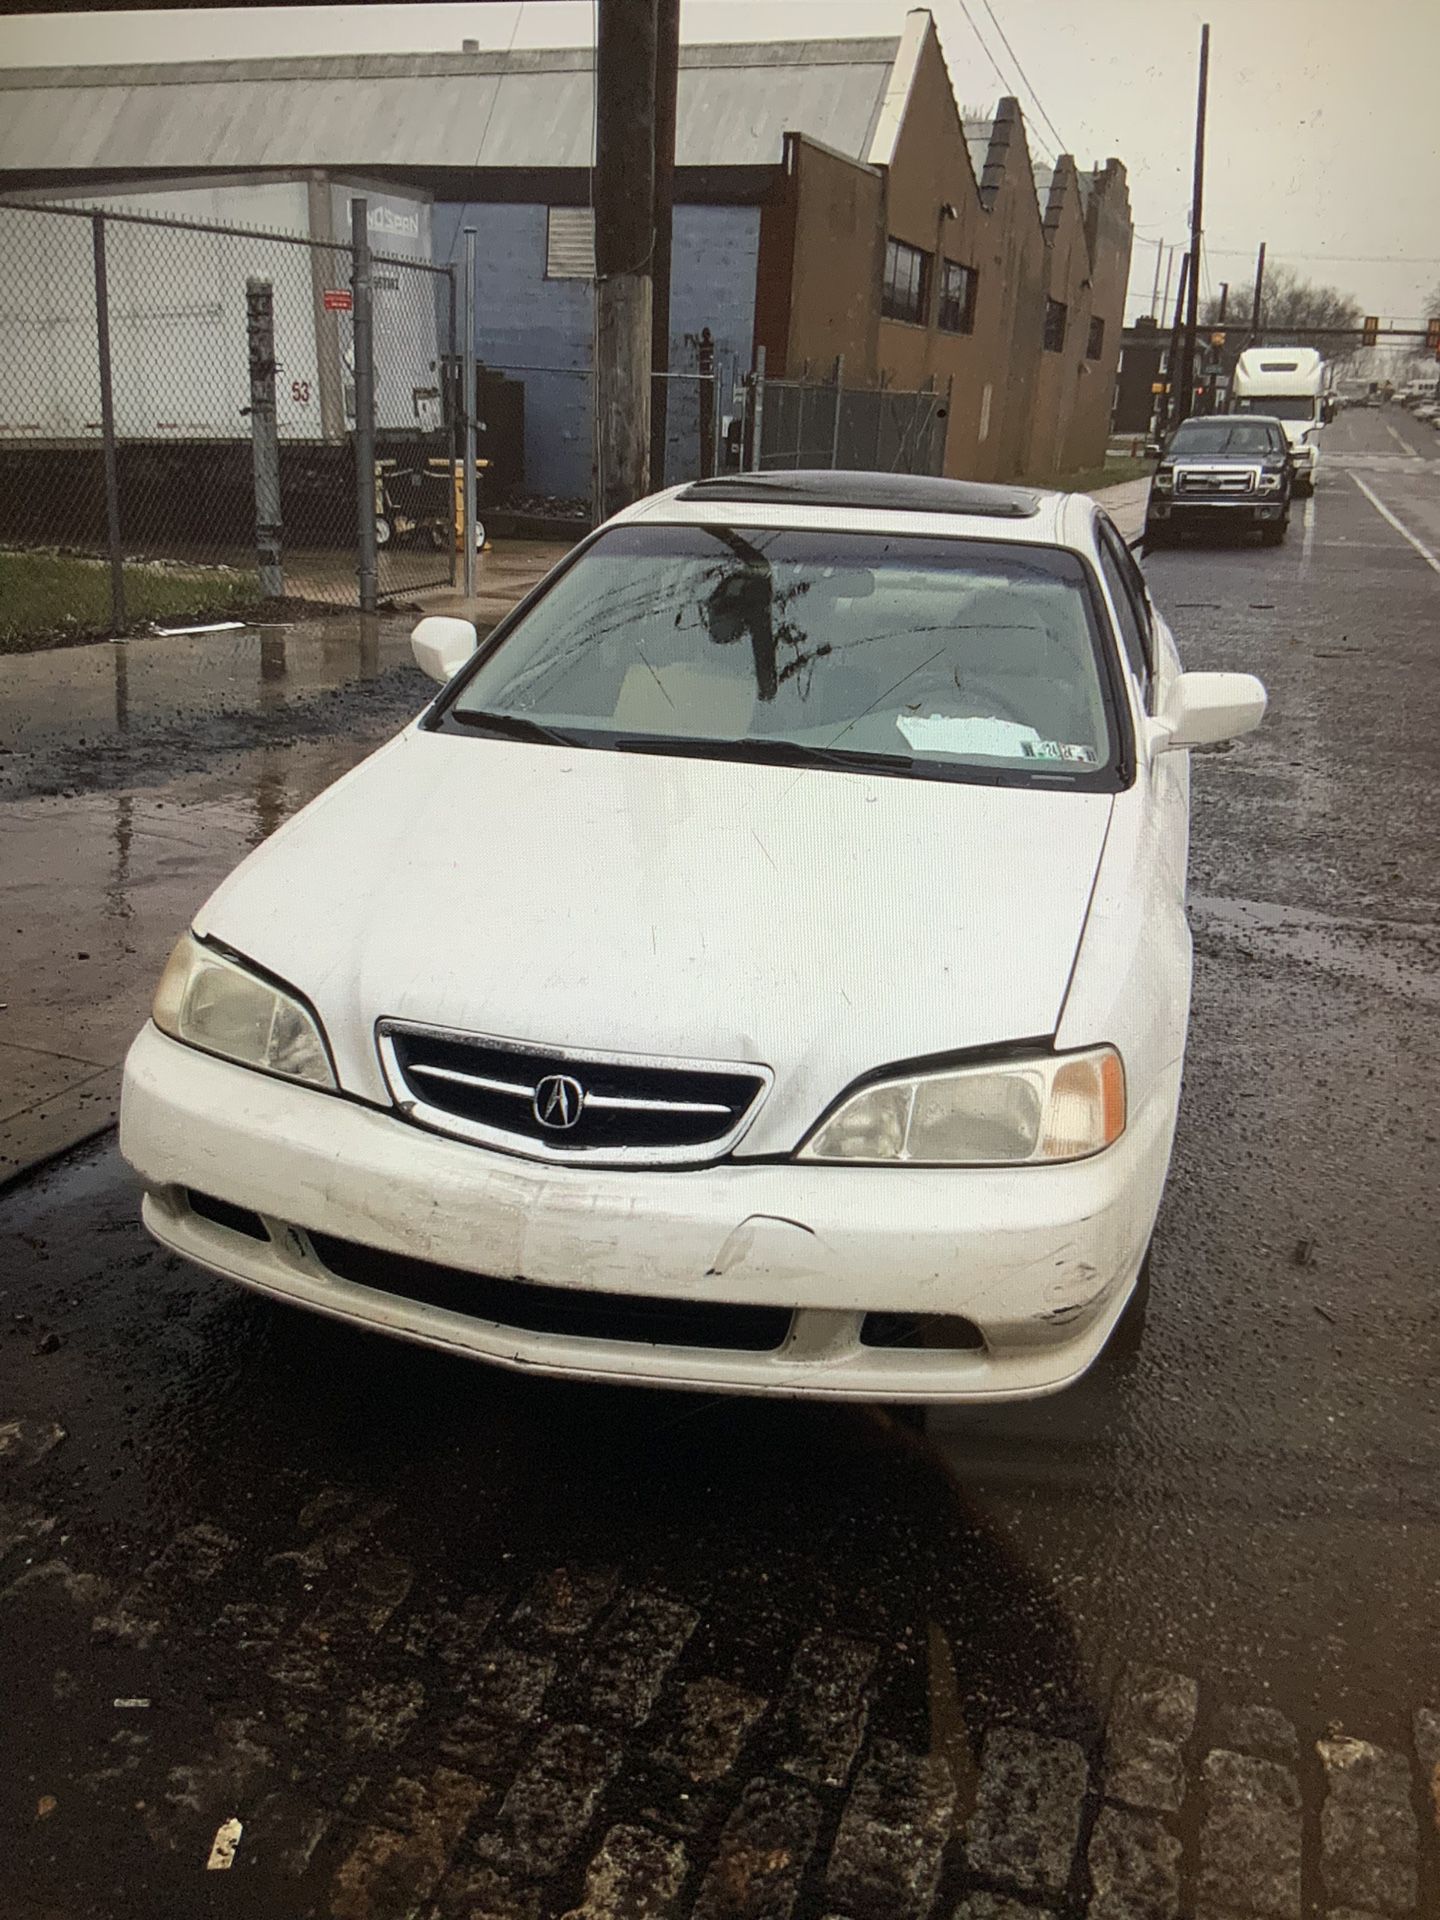 2000 ACURA TL (PARTS ONLY)